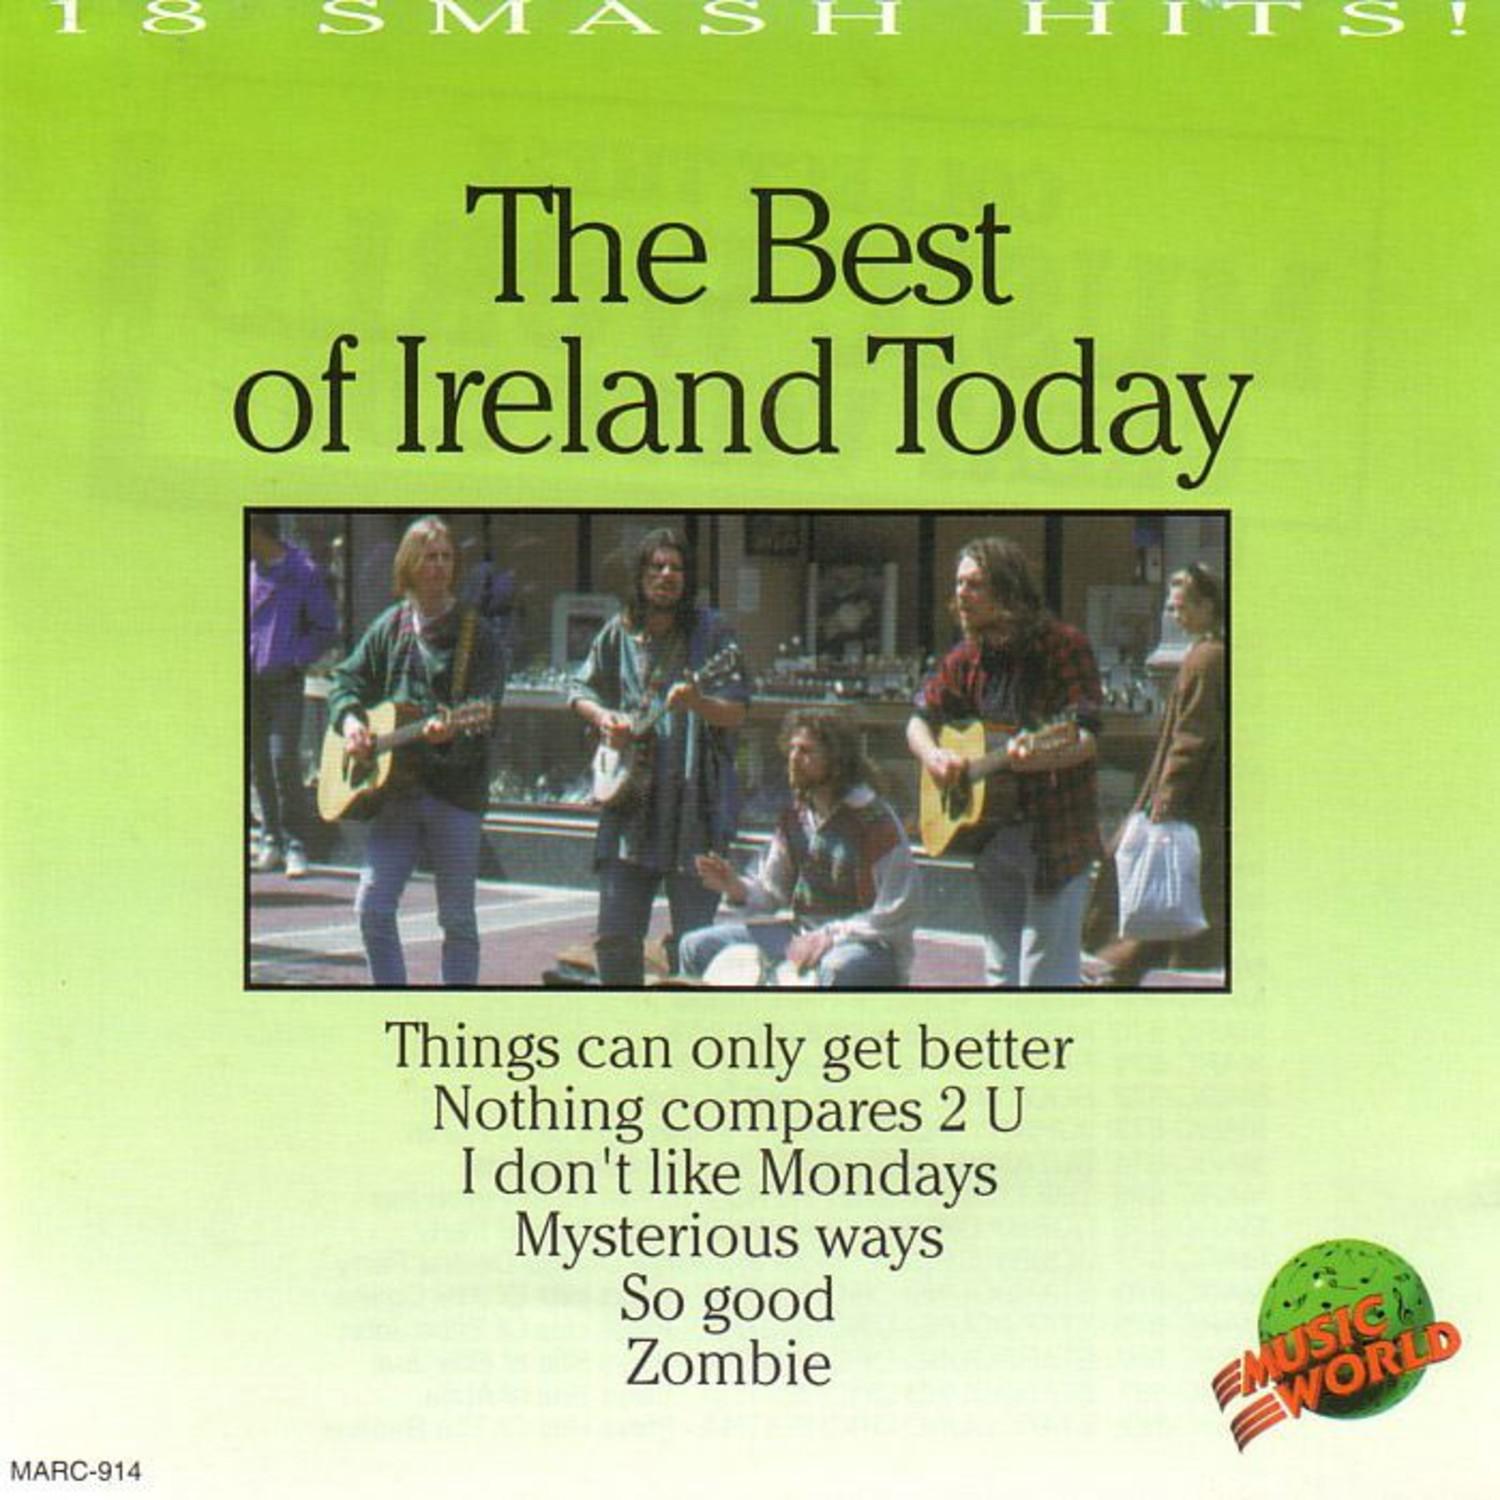 The Best Of Ireland Today - 18 Smash Hits